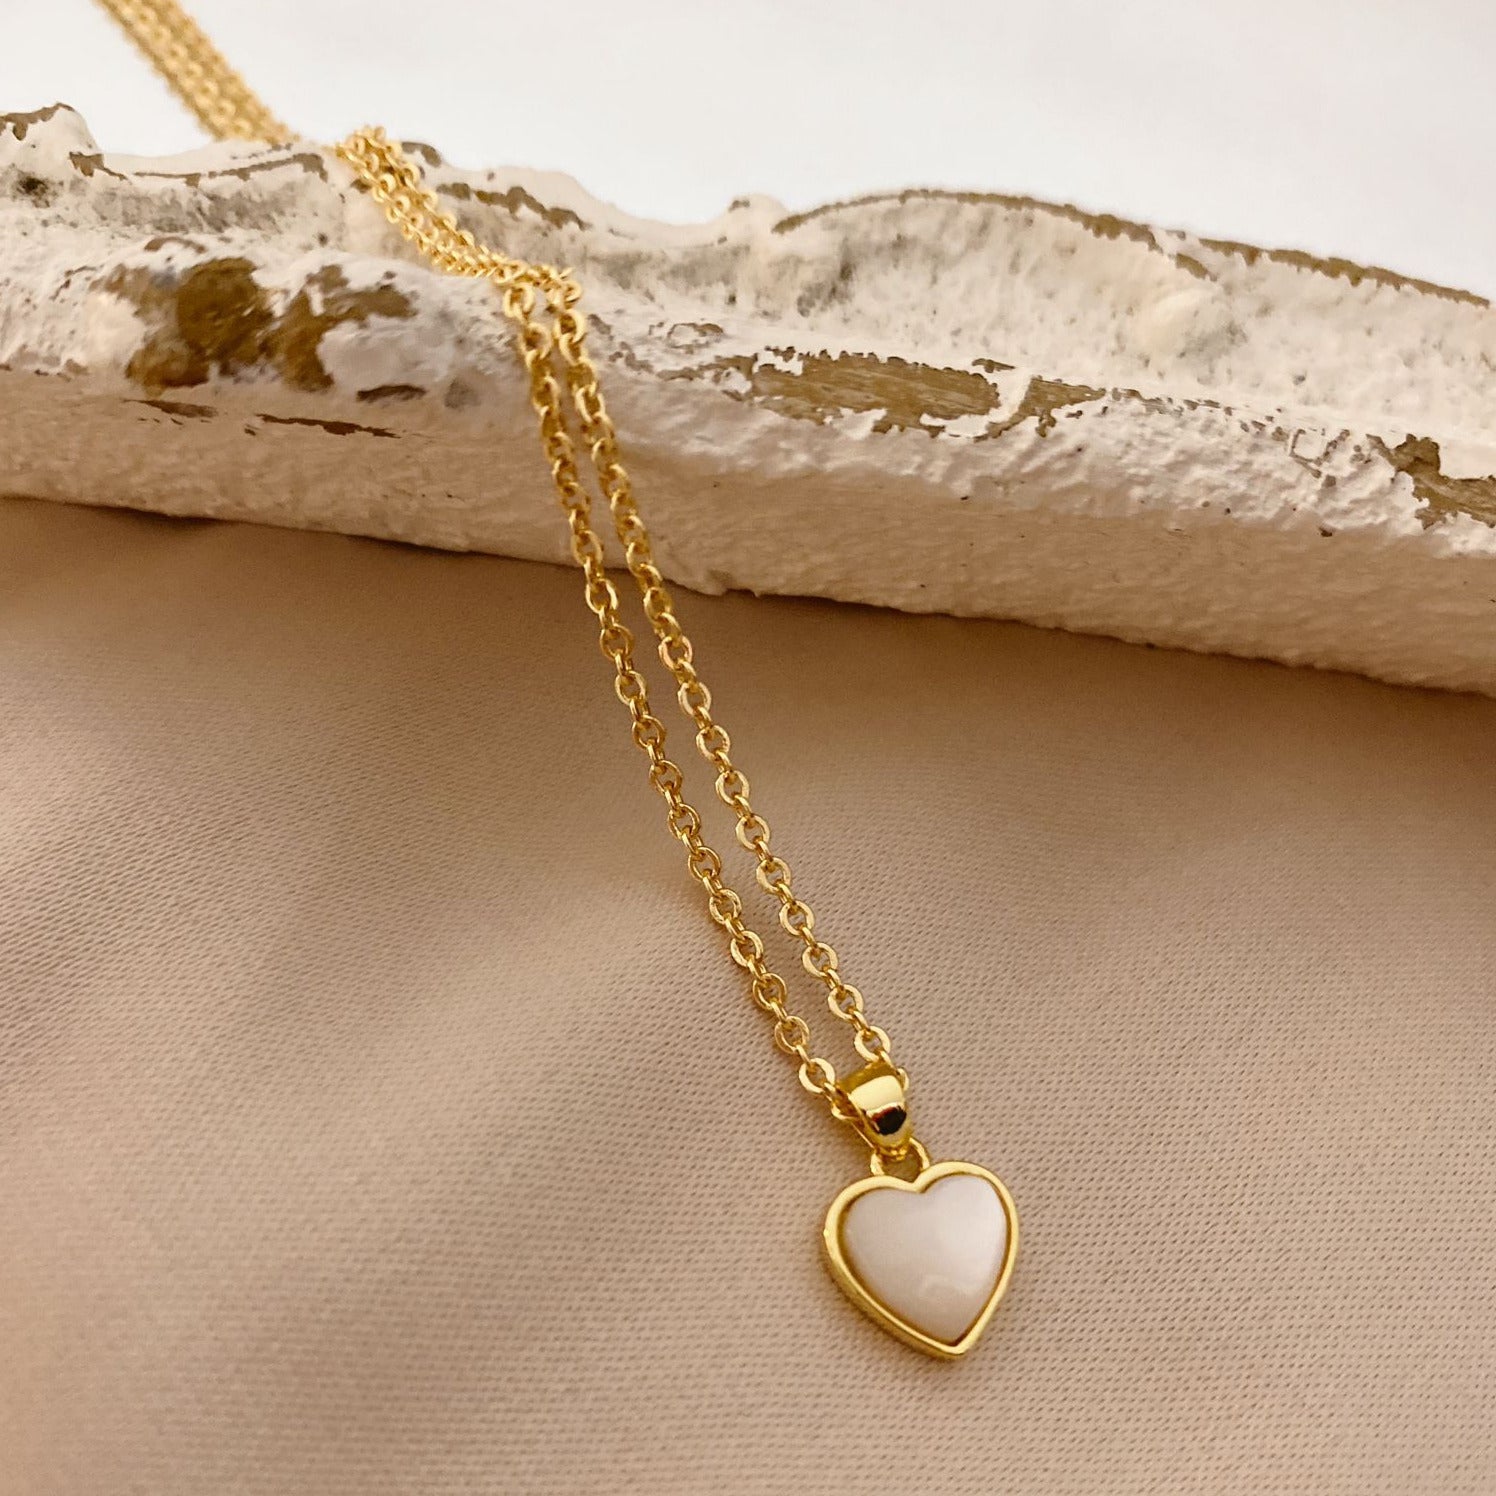 Chain with Heart Charm